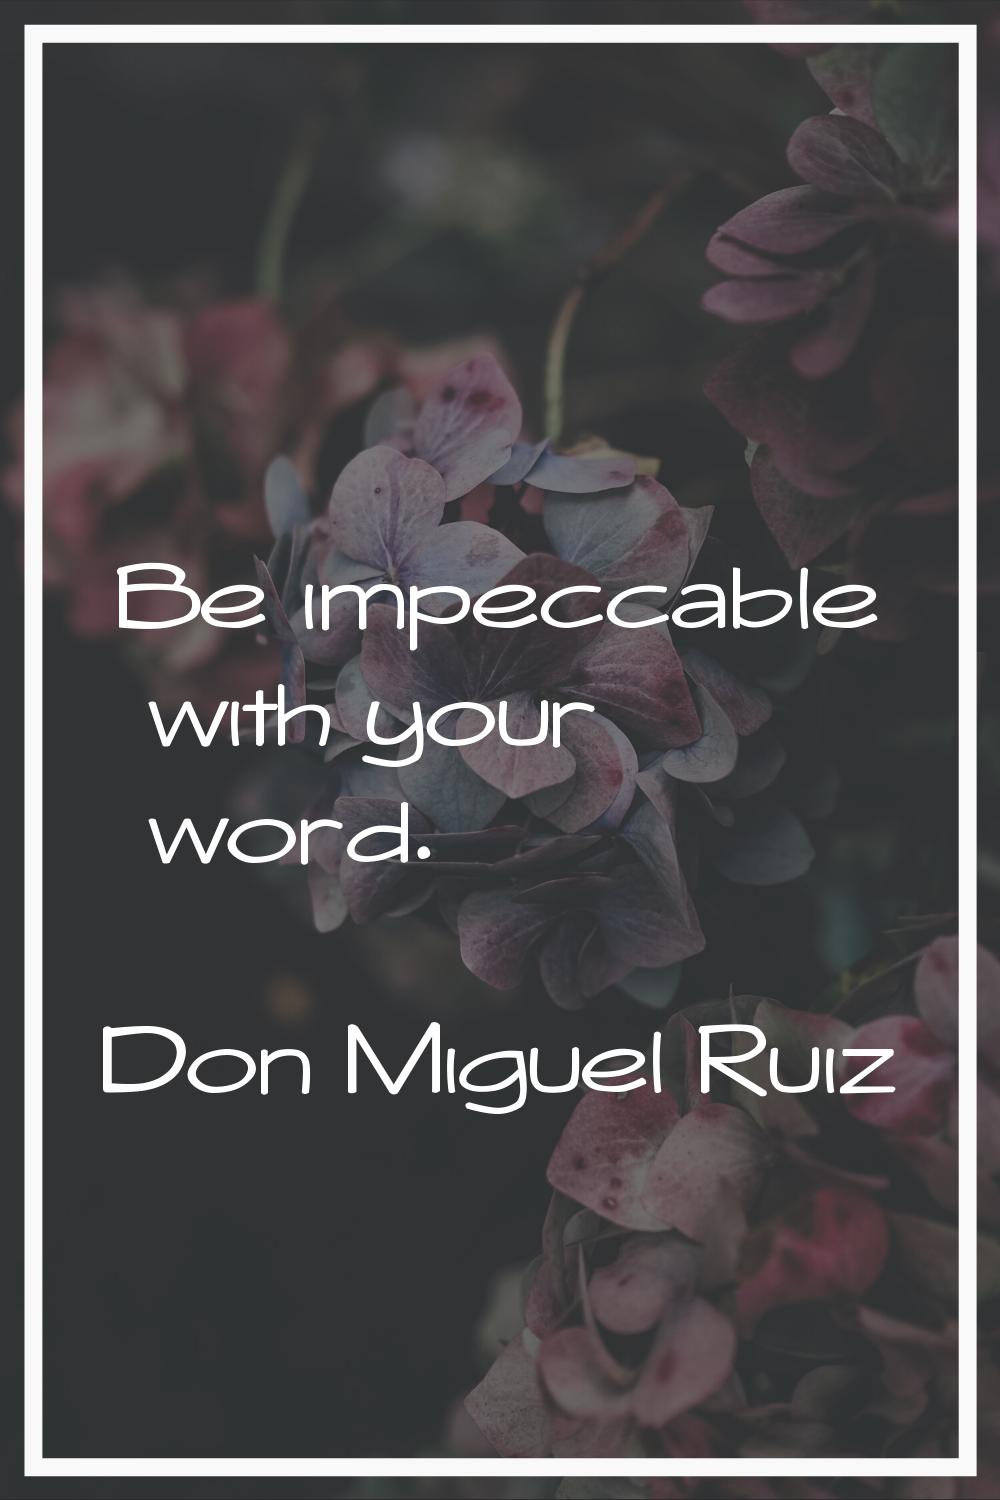 Be impeccable with your word.